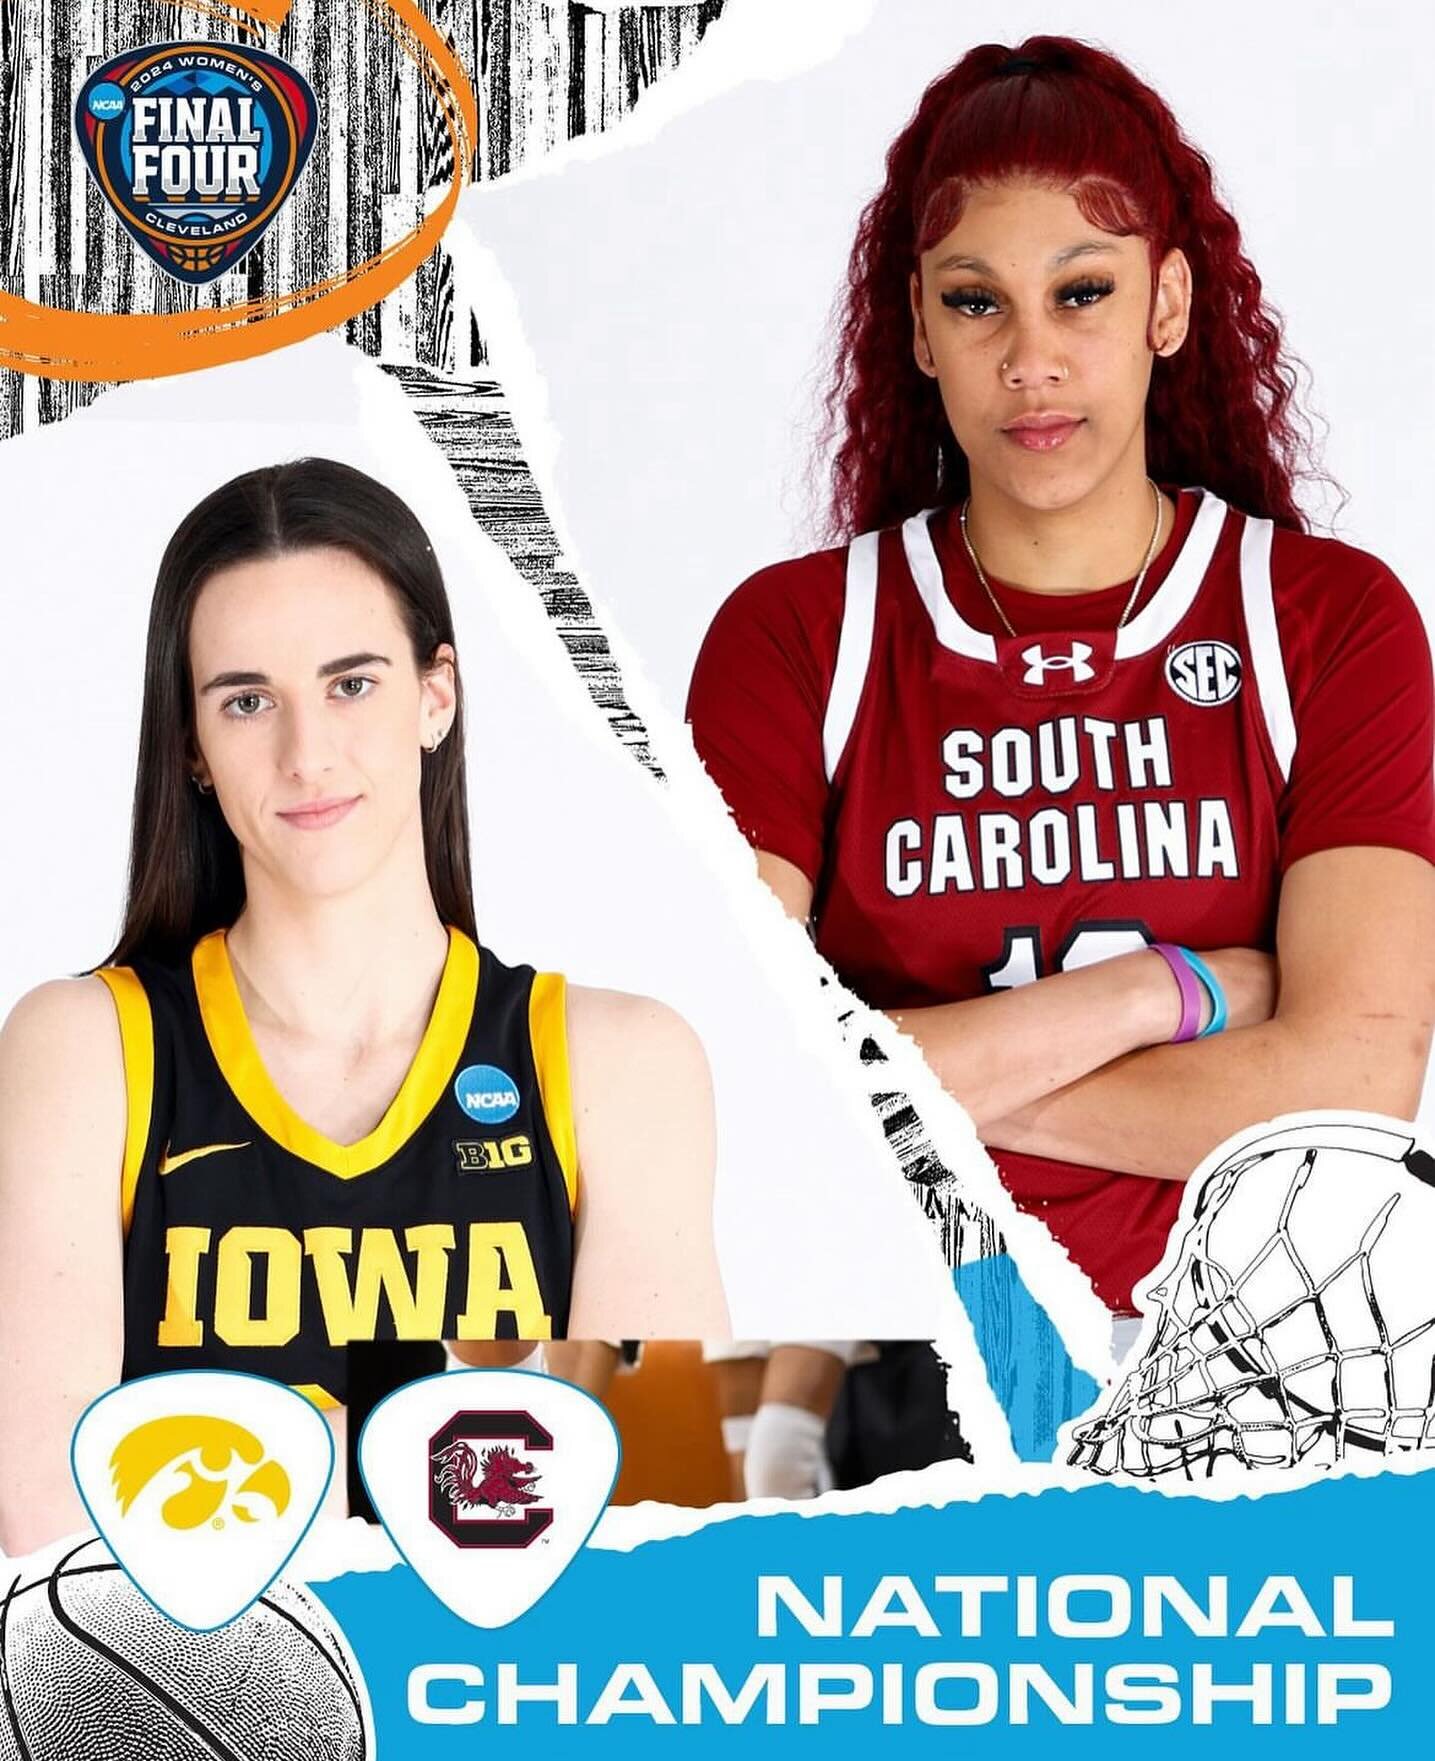 IT&rsquo;S CHAMPIONSHIP SUNDAY 🏀 We will be showing the NCAA Women&rsquo;s Final Four Championship at 3pm today. Full game sound throughout. Are you #teamhawkeye or  #teamgamecock? Either way, let&rsquo;s hope for a great game between two incredible